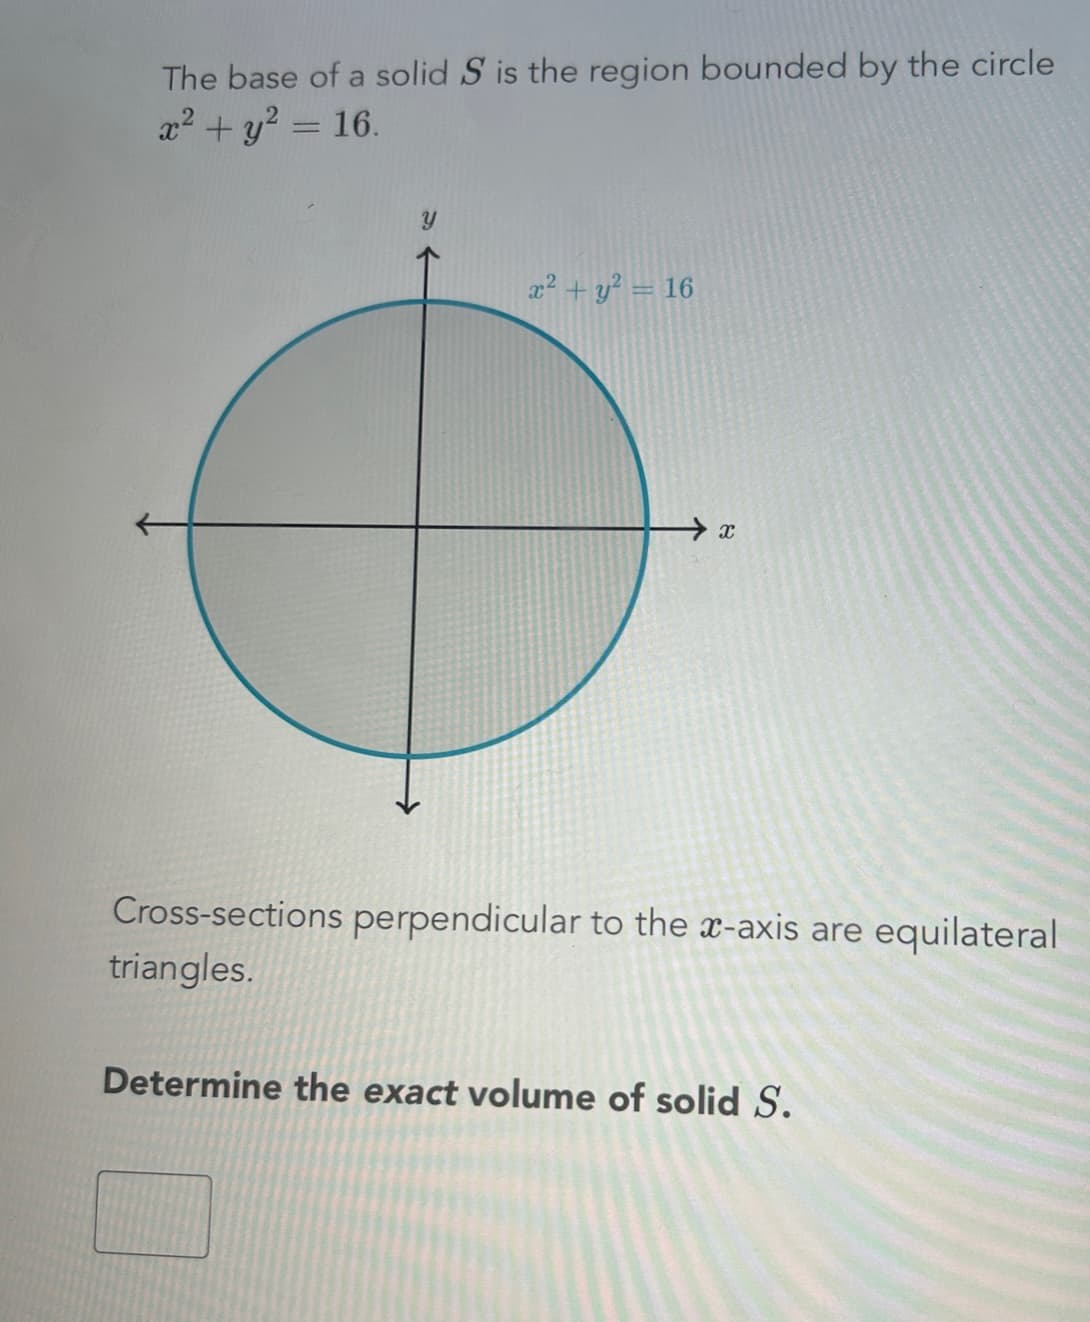 The base of a solid S is the region bounded by the circle
x² + y² = 16.
x² + y² = 16
→x
Cross-sections perpendicular to the x-axis are equilateral
triangles.
Determine the exact volume of solid S.